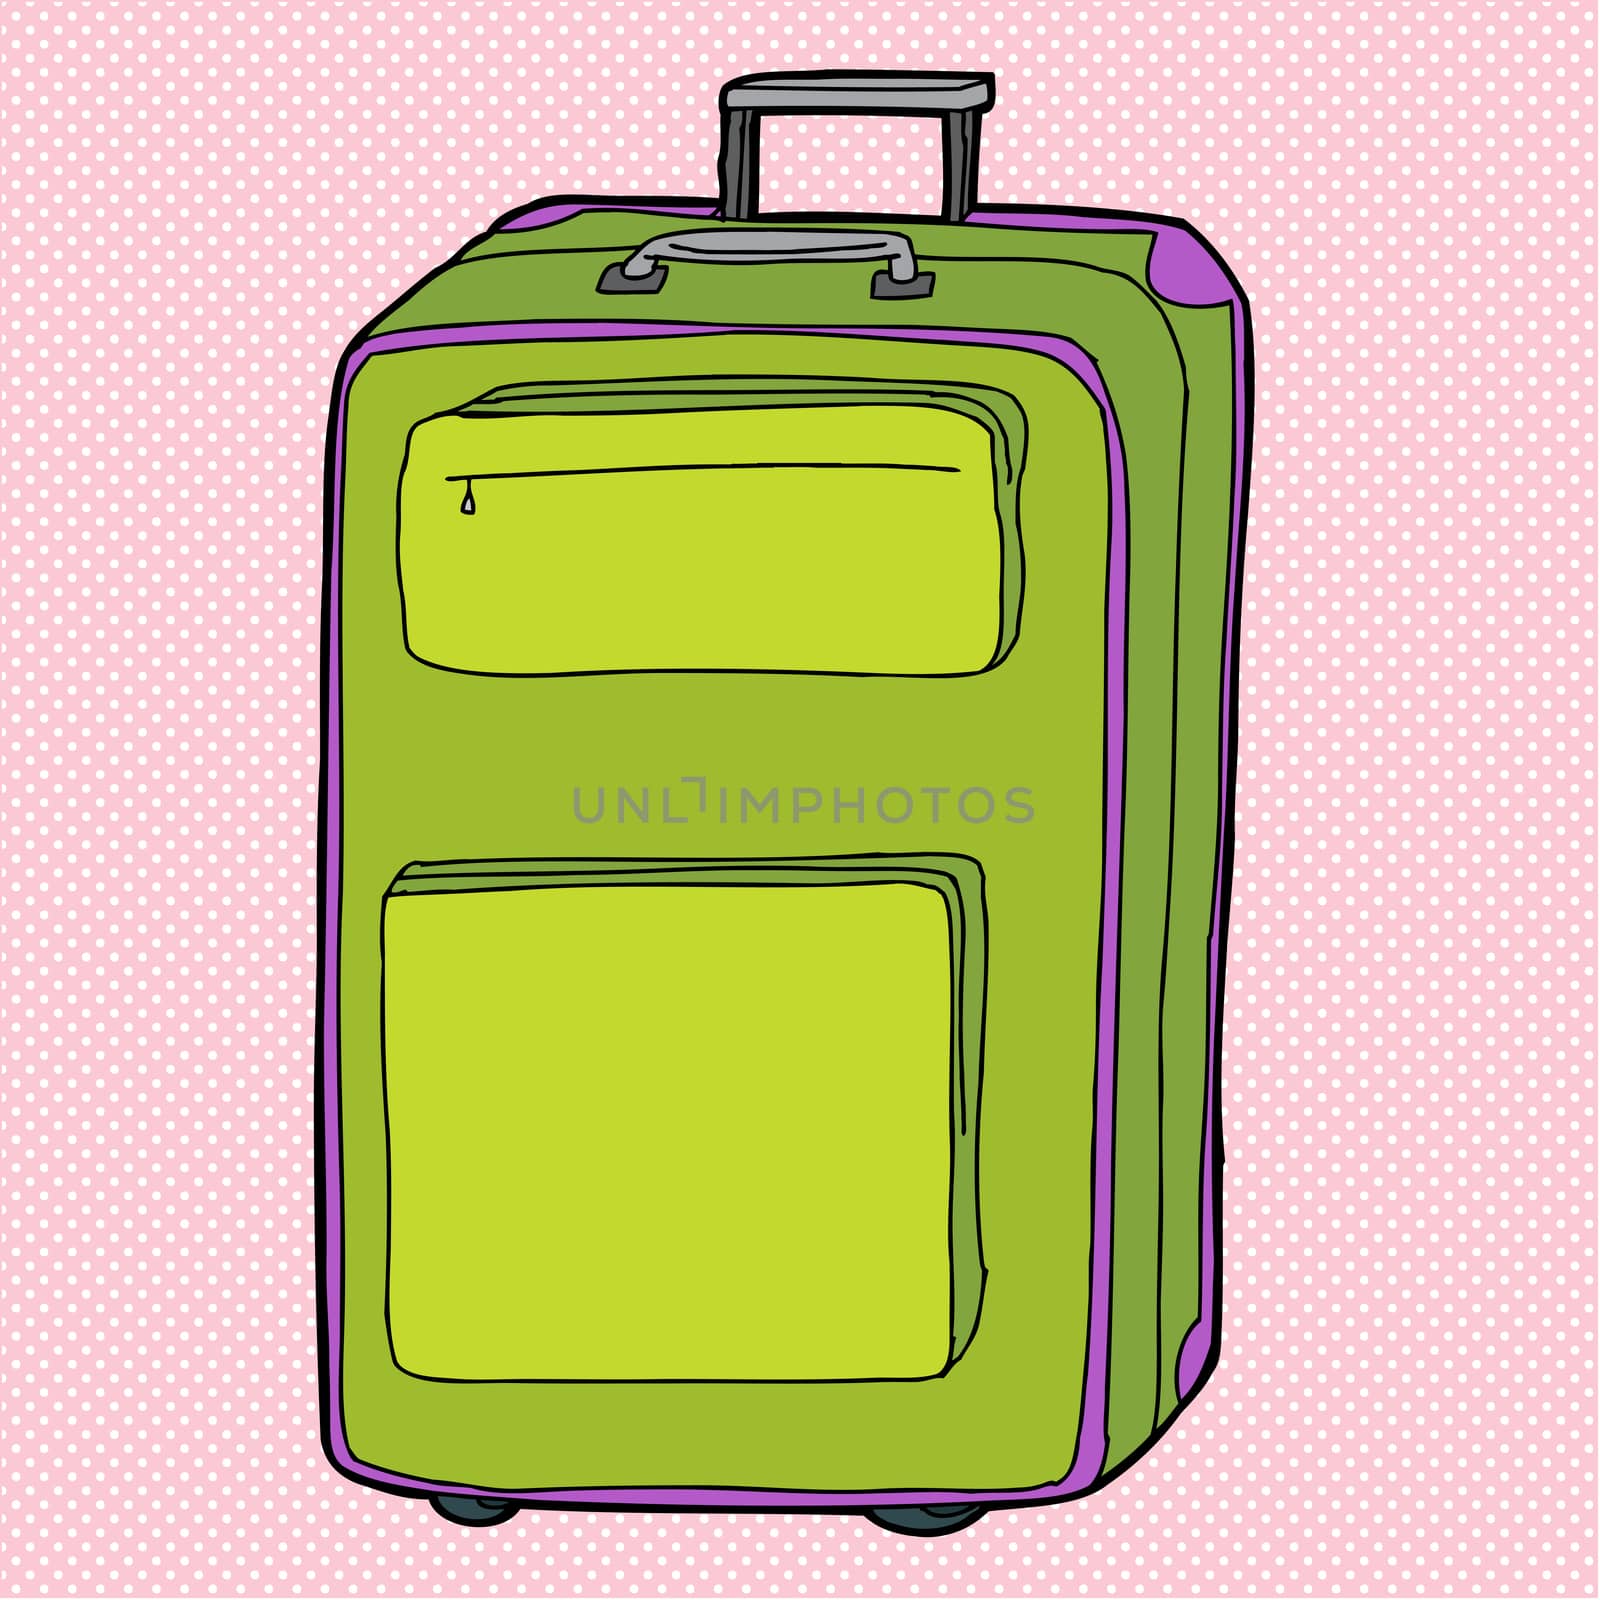 Suitcase Over Pink Background by TheBlackRhino